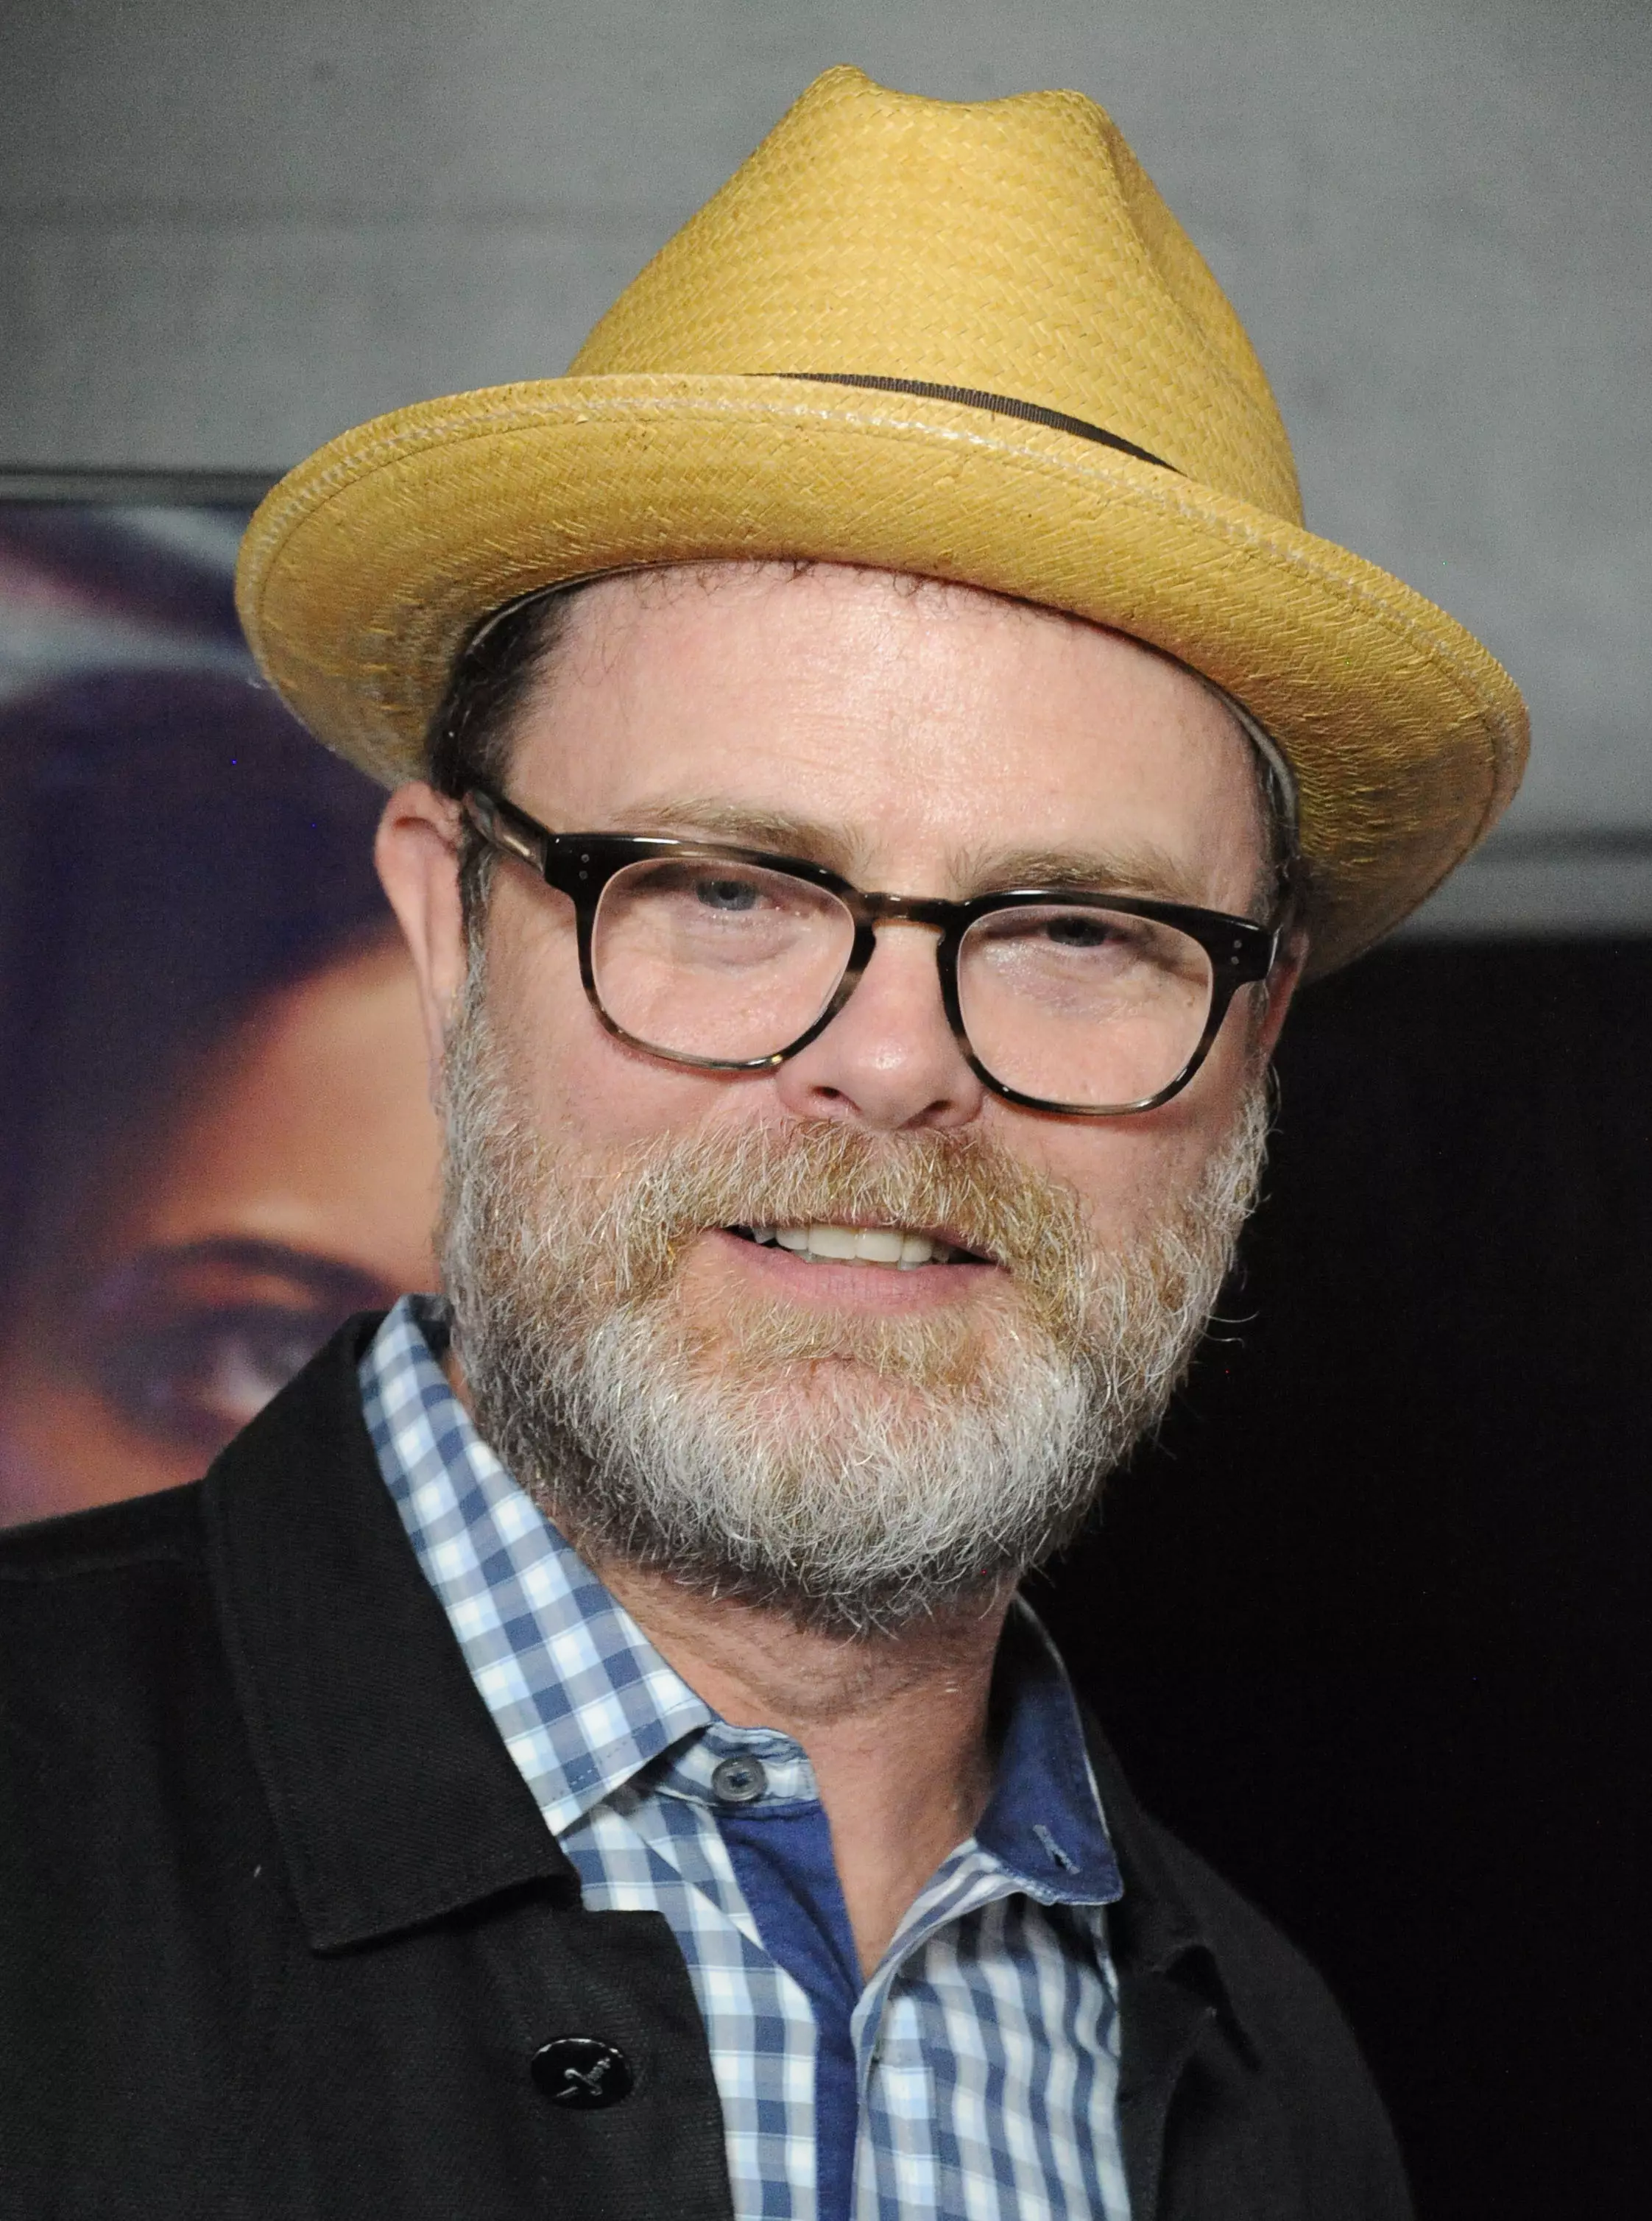 Rainn Wilson said racism exists in the US in 2019.